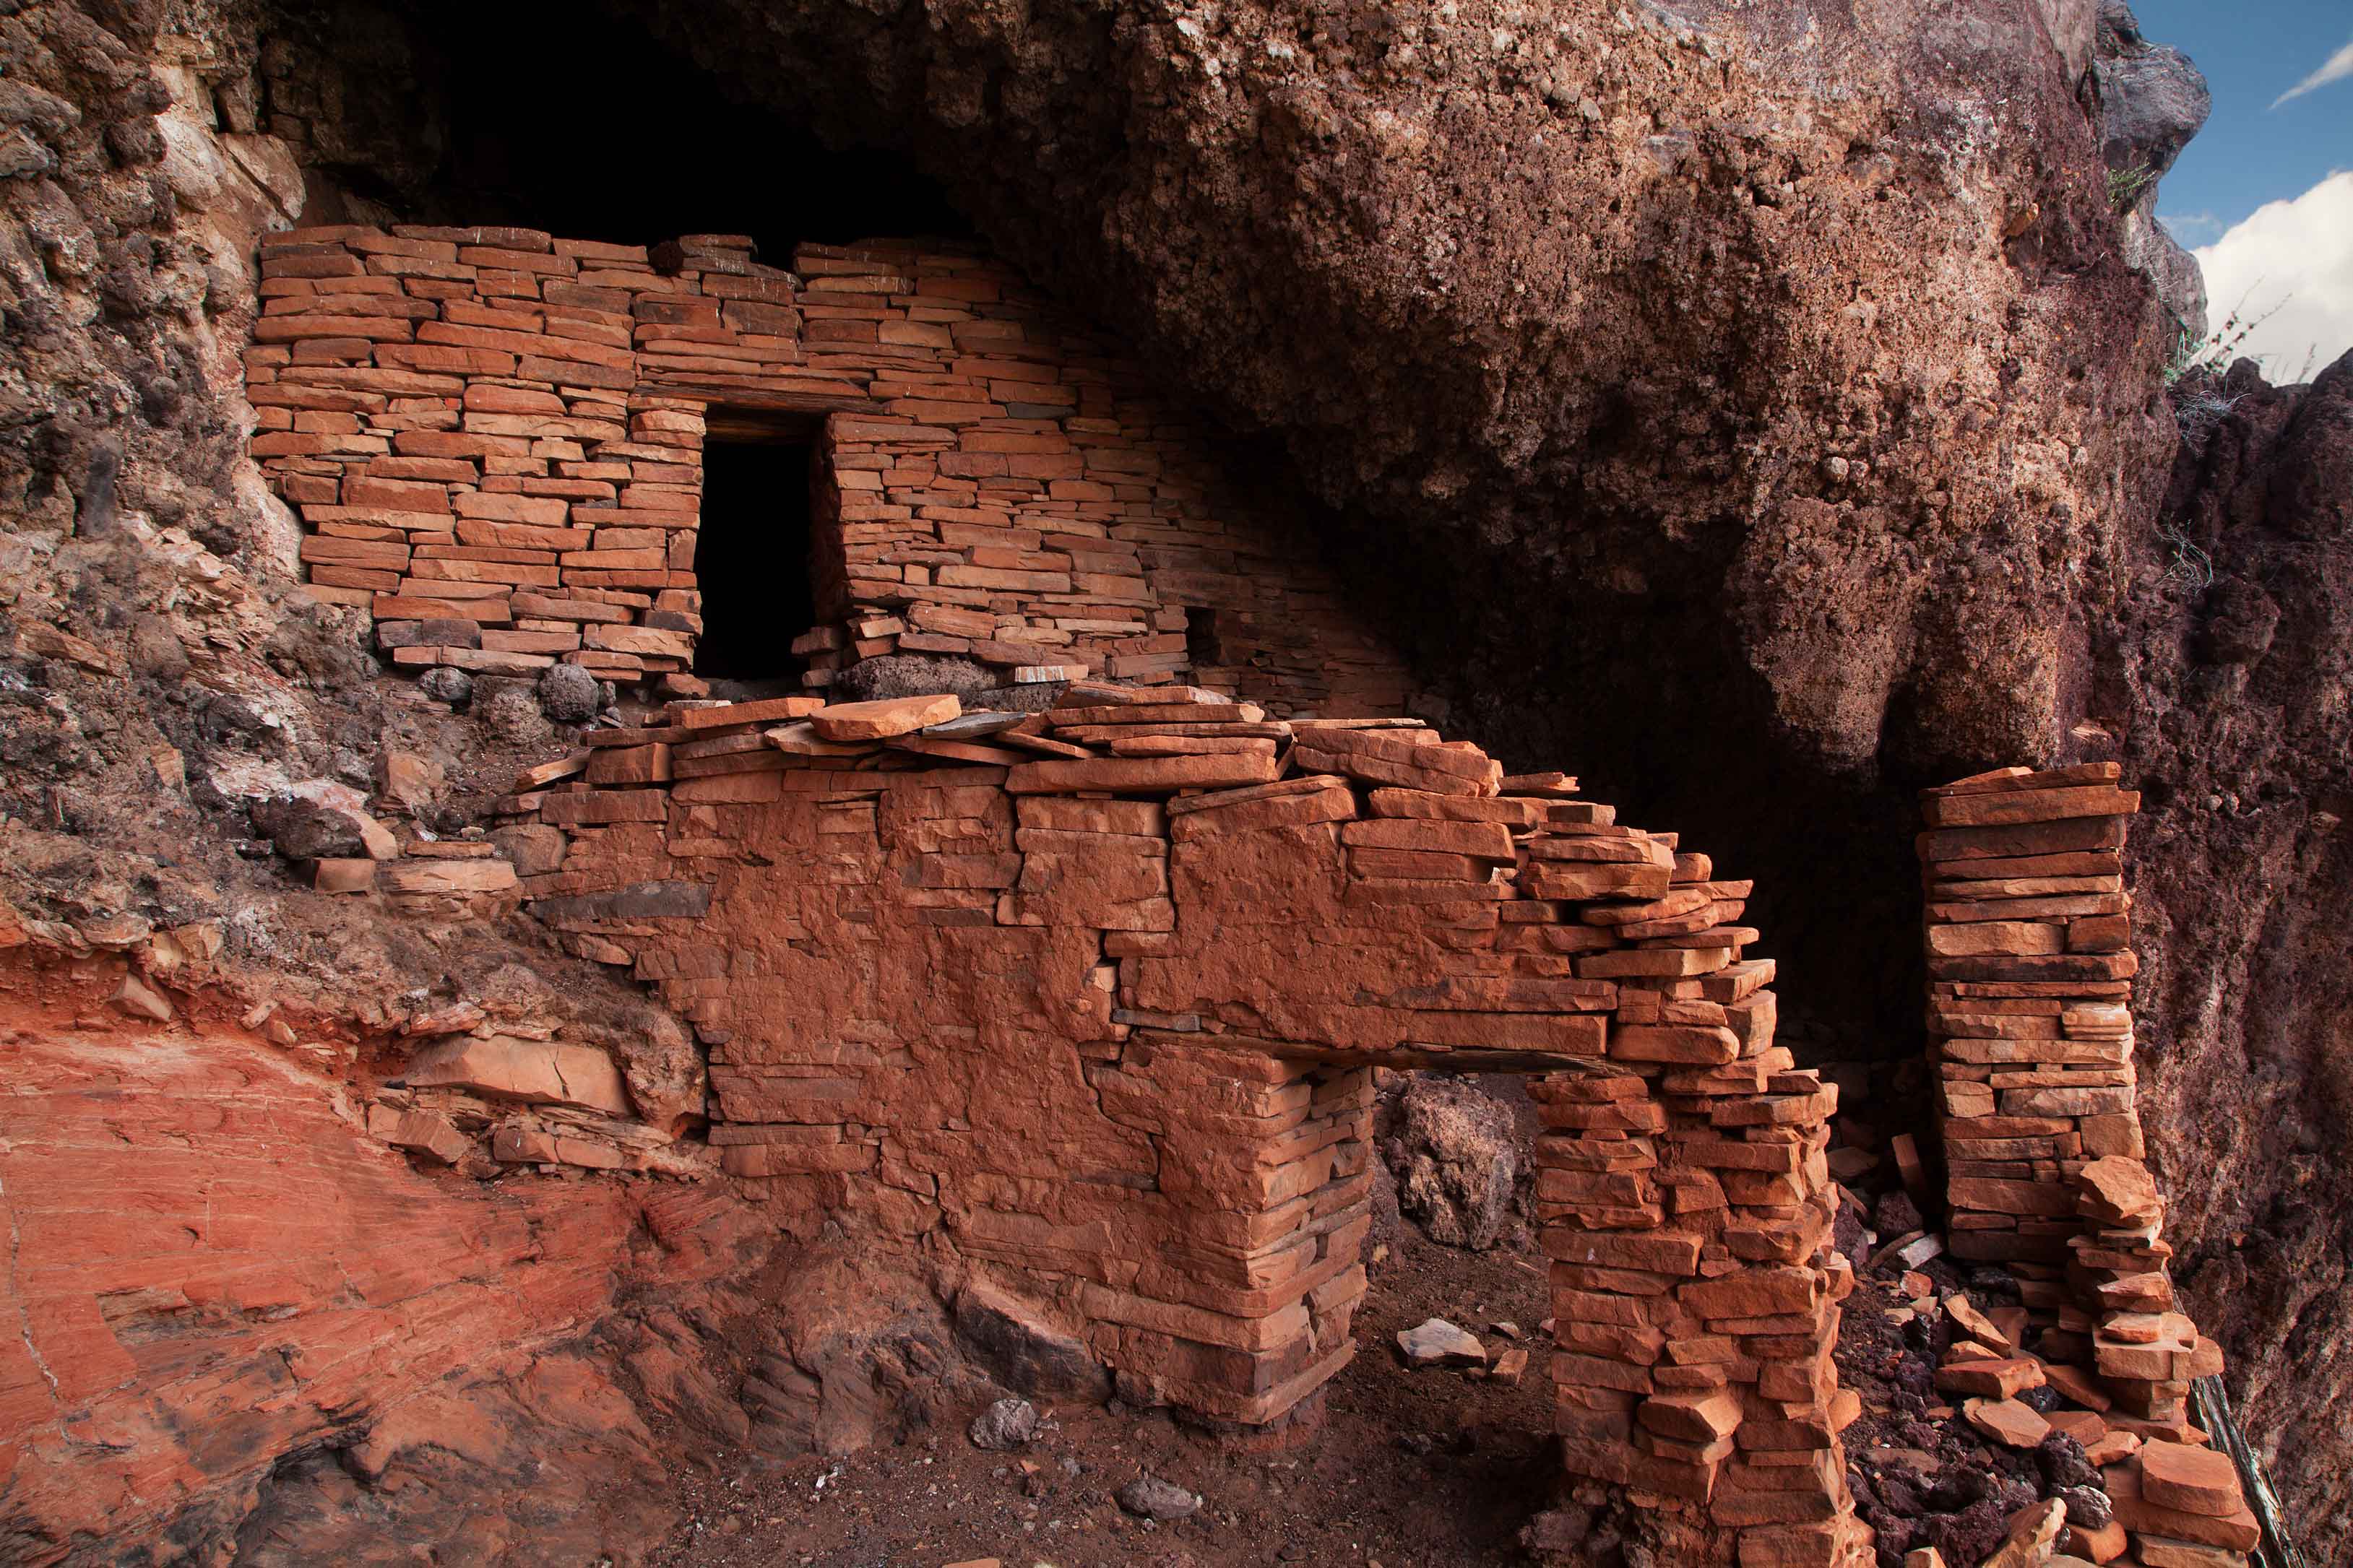 Part of a Native American cliff dwelling overlooking the Sycamore Canyon Wilderness built by the Verde Hohokam (a.ka., Southern Sinagau) between A.D. 1125 and 1300